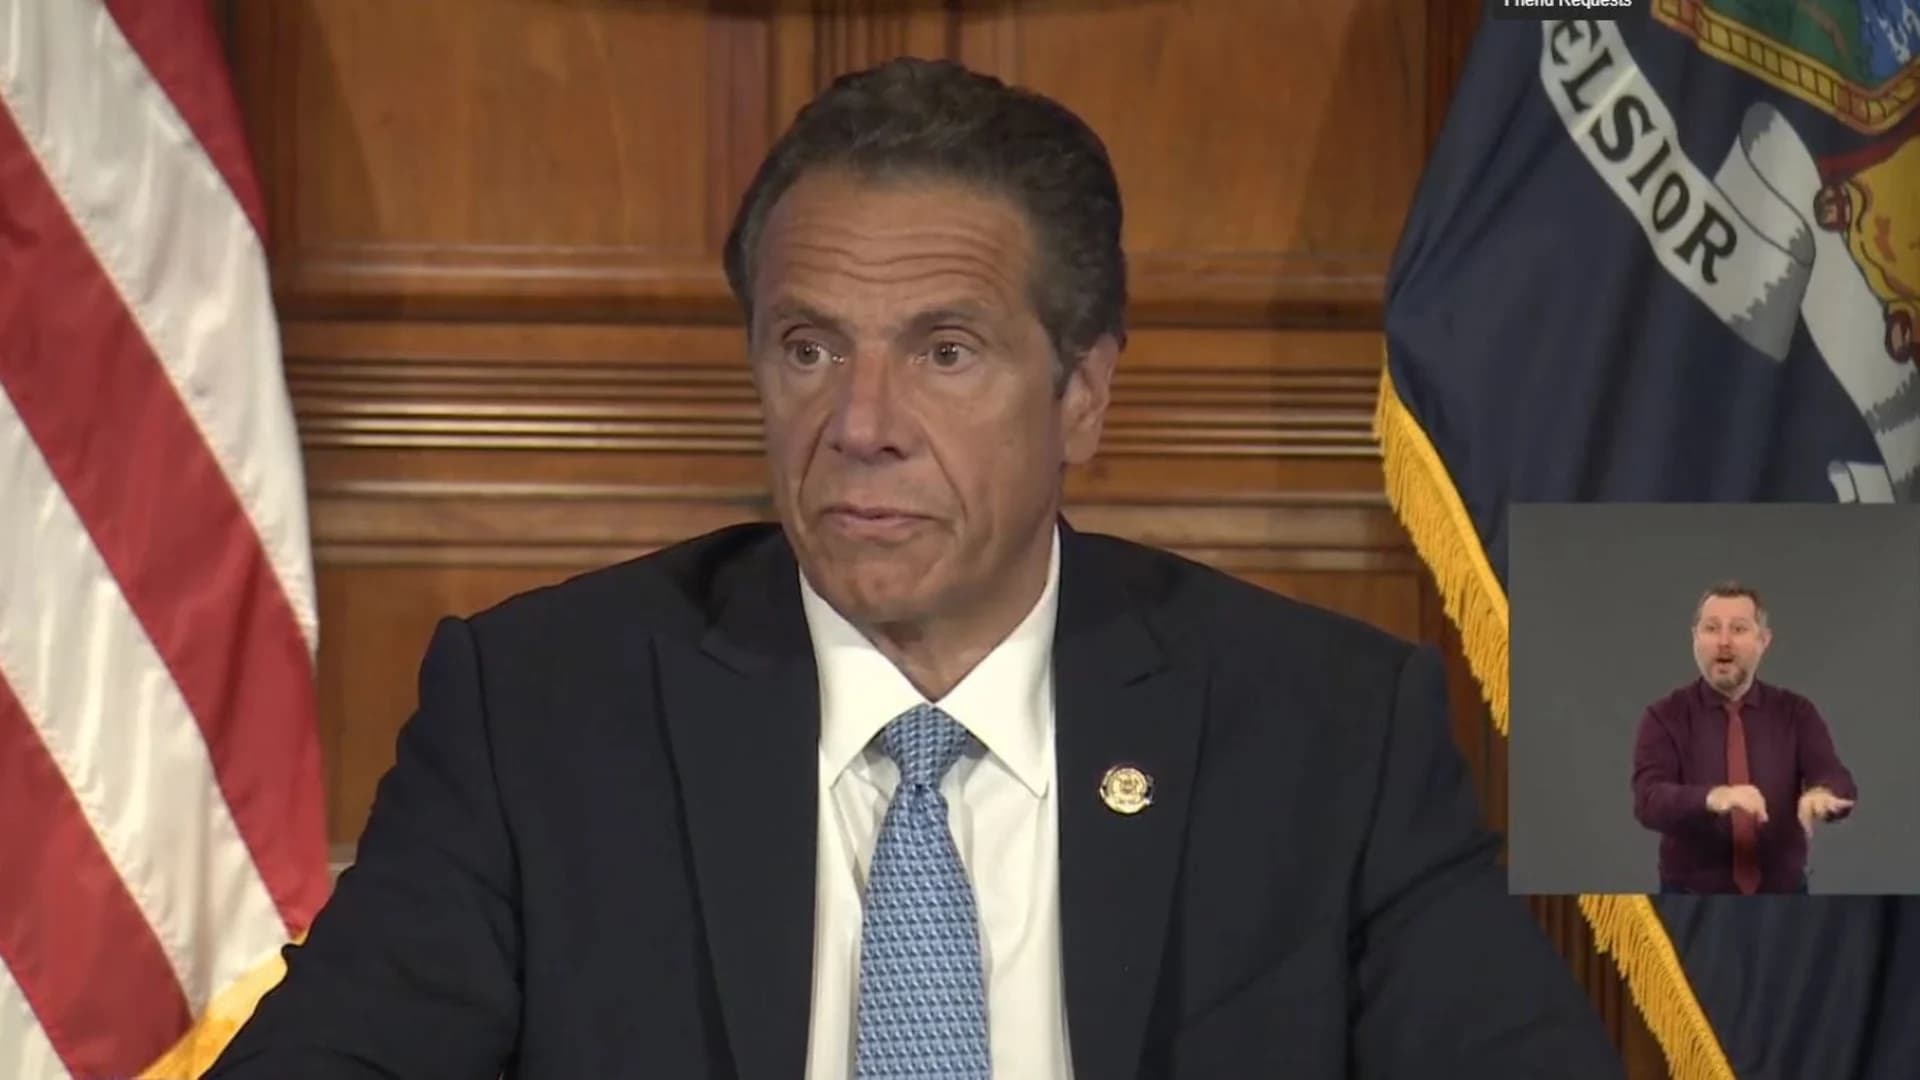 Gov. Cuomo holds news briefing in New York ahead of Isaias